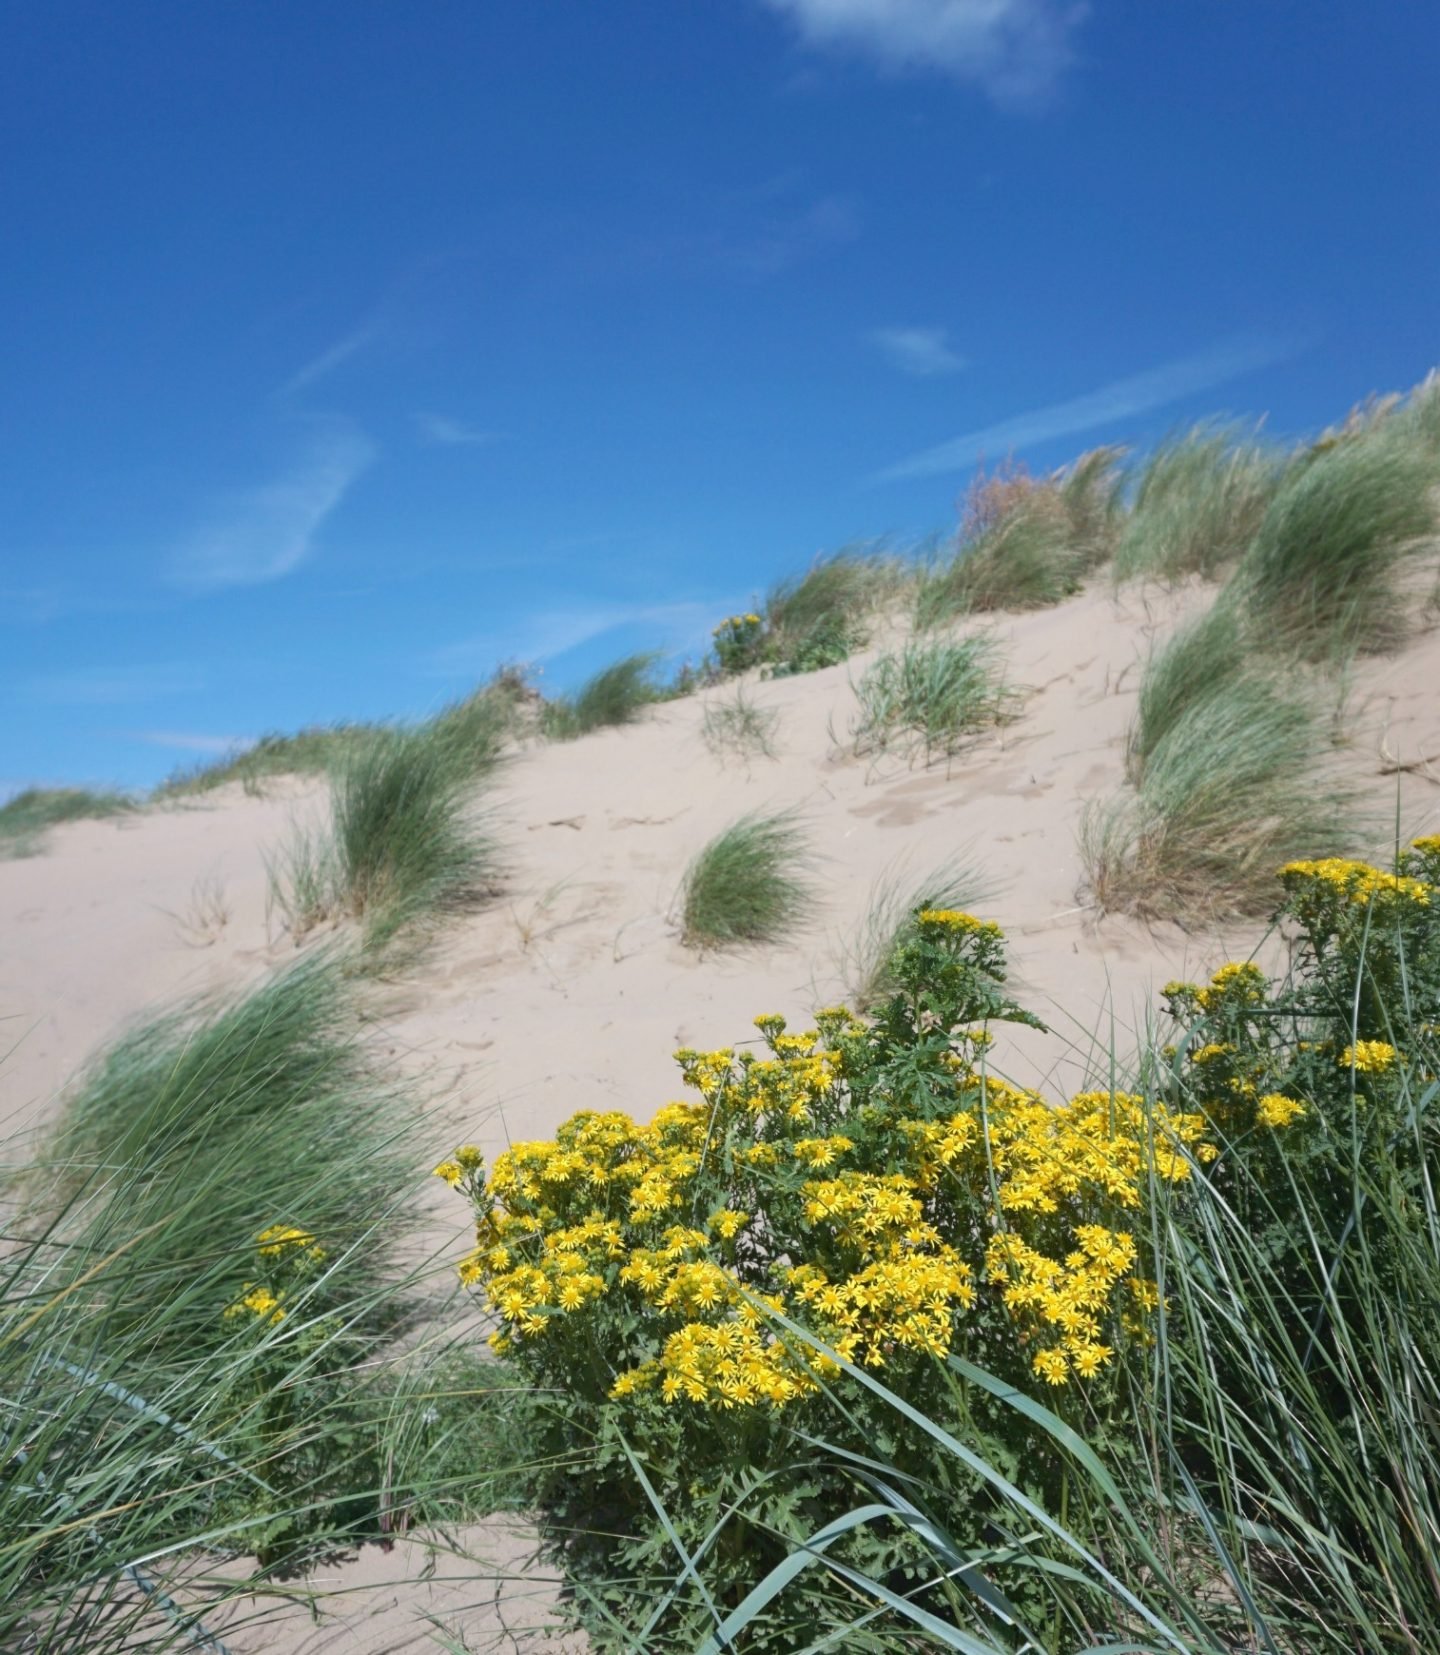 Flowers on The Sand Dunes At St Annes www.extraordinarychaos.com